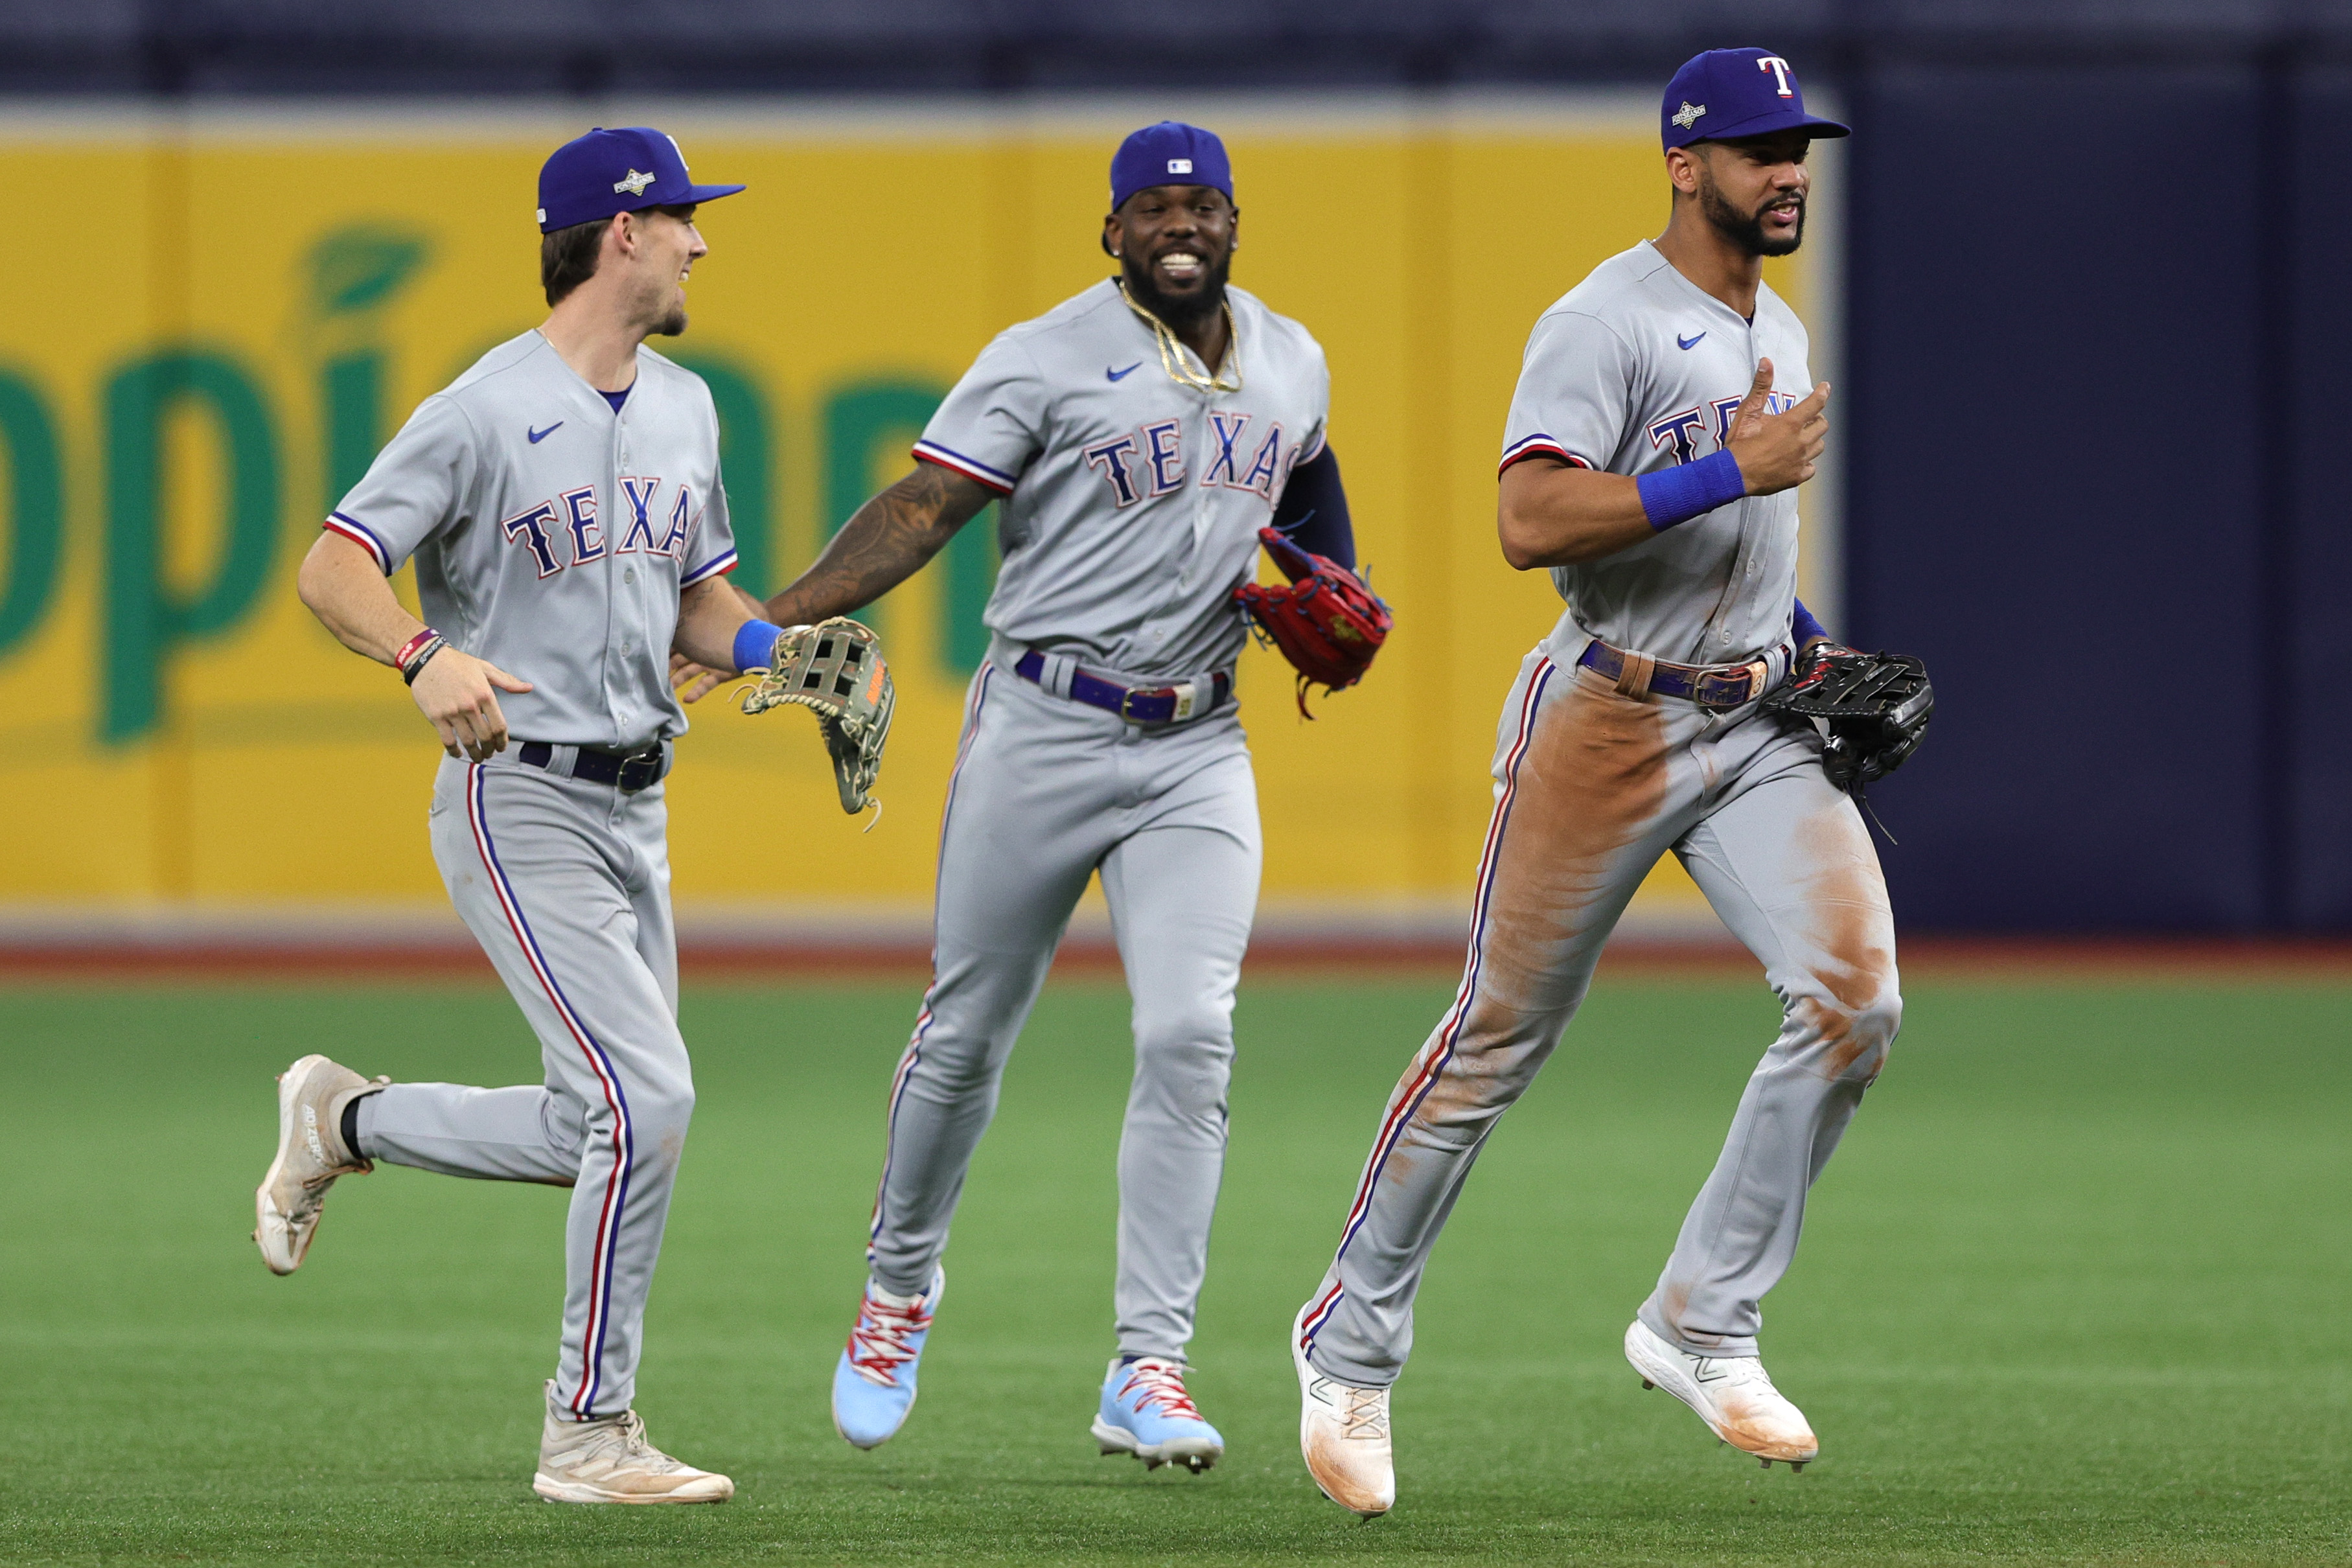 Texas Rangers ALDS Game 3 preview at Baltimore Orioles